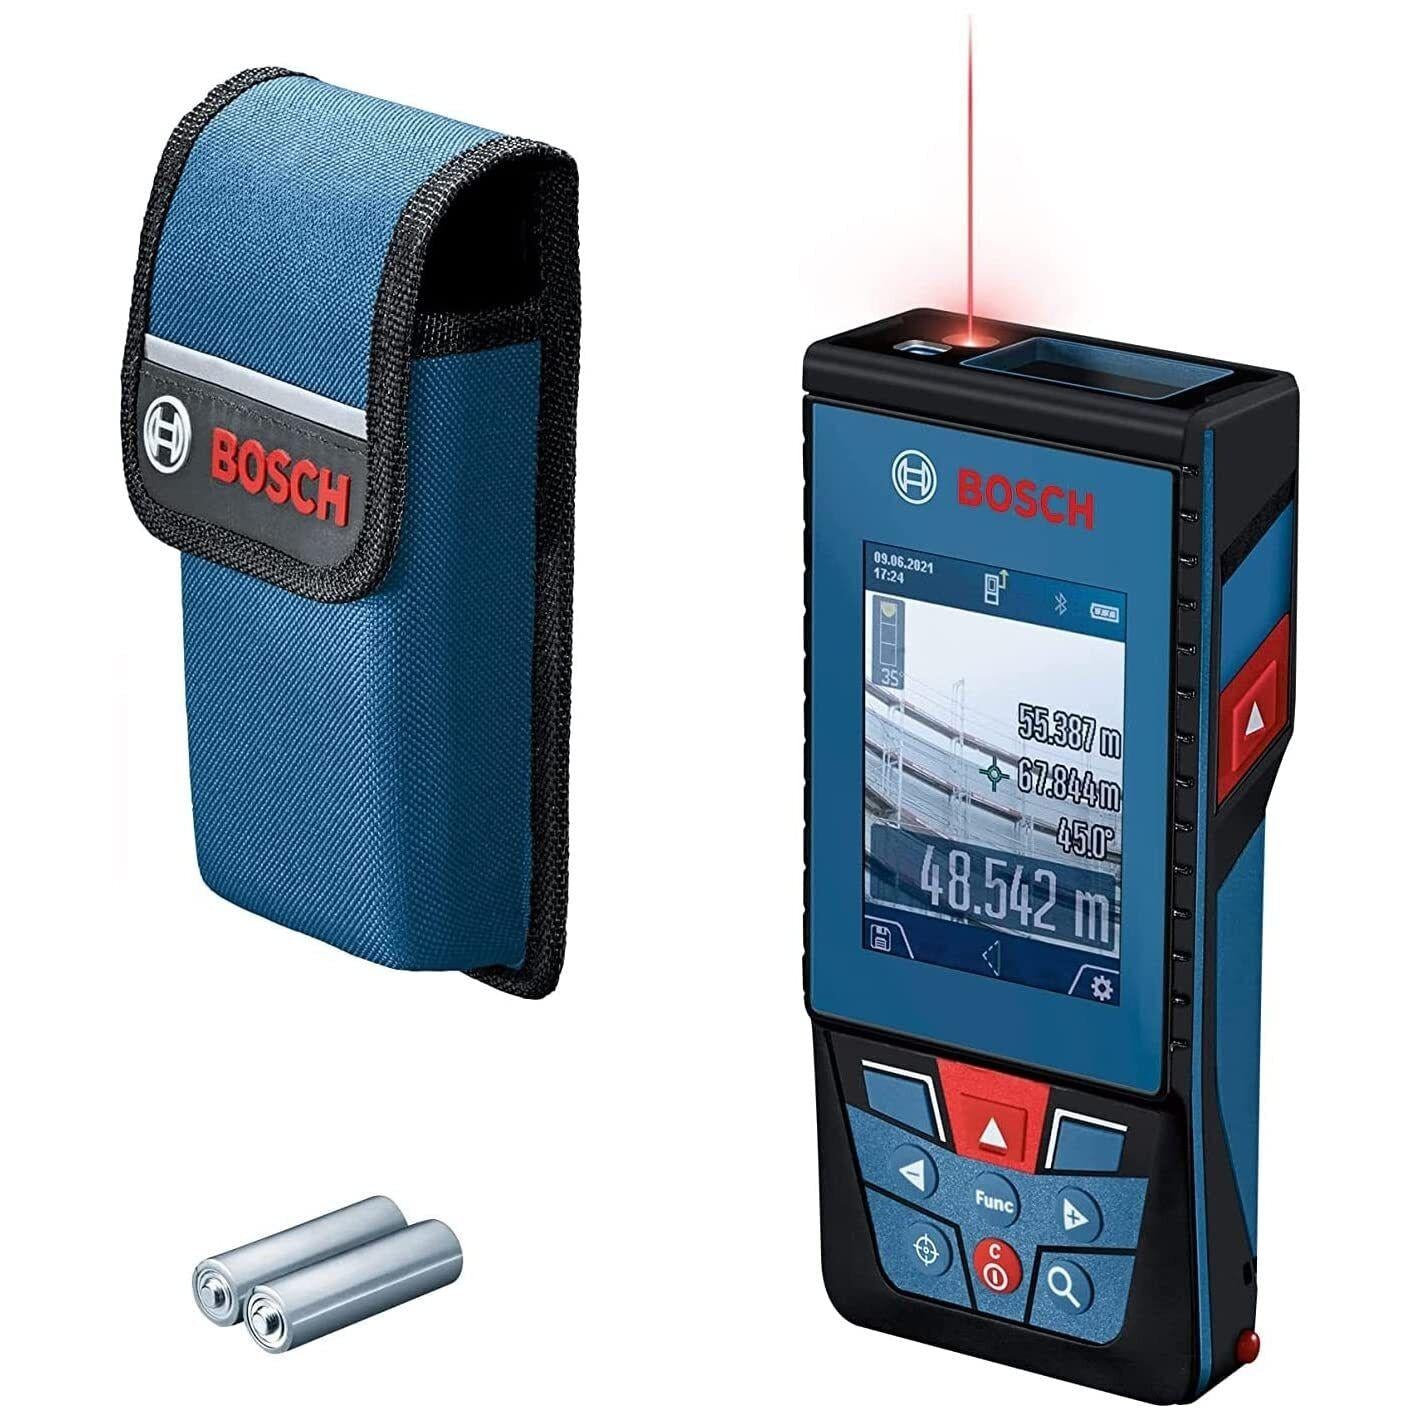 Bosch Professional Laser Measure GLM 100-25 C 0601072Y00 Power Tool Services